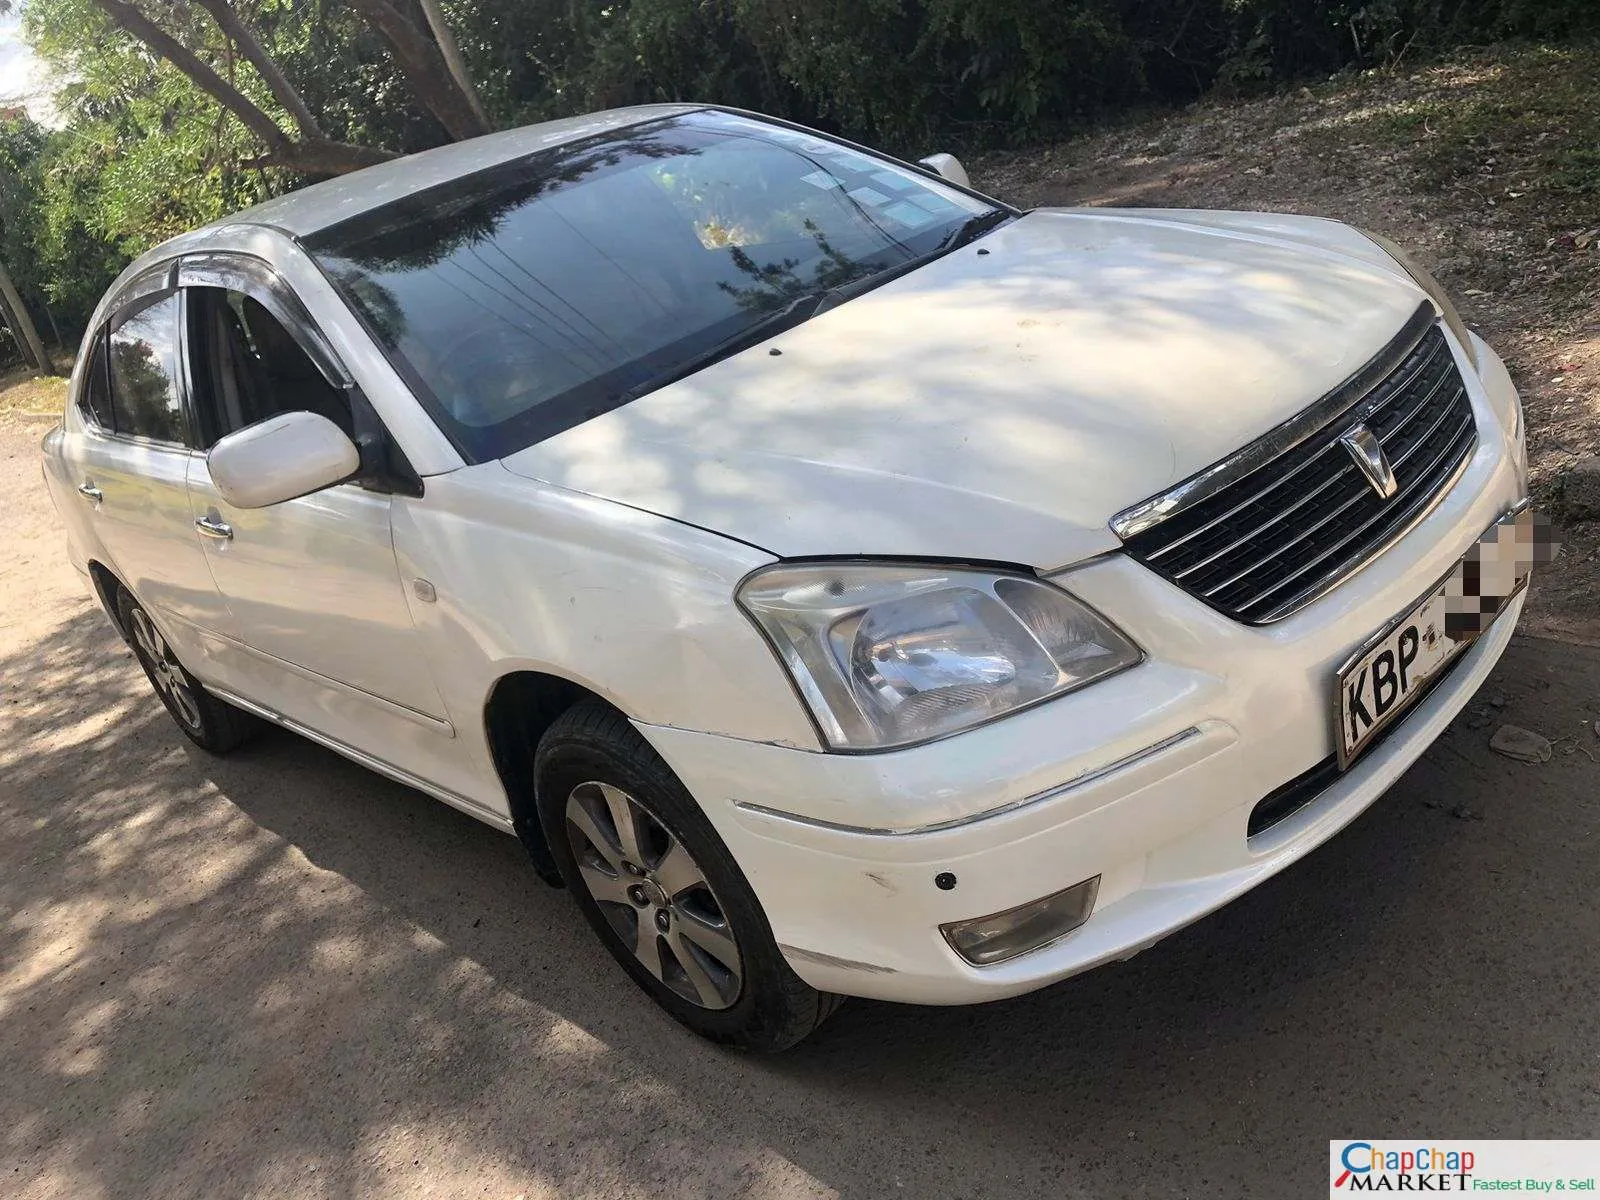 Cars Cars For Sale/Vehicles-Toyota PREMIO 240 500K ONLY QUICK SALE You pay 30% Deposit INSTALLMENTS Trade in Ok 3